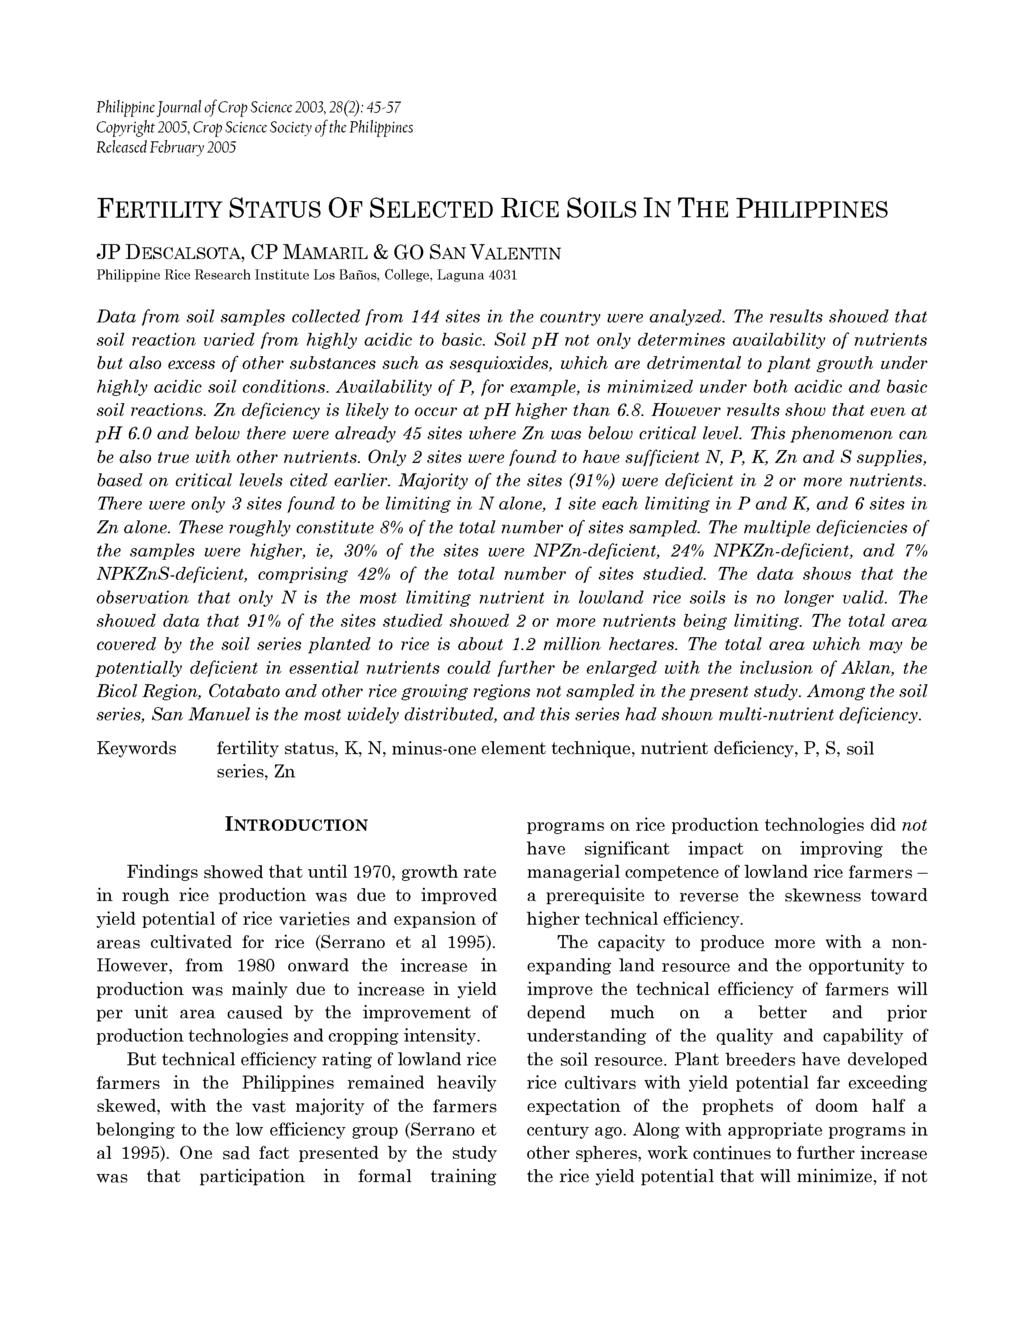 Philippine Journal of Crop Science 2003, 28(2): 45-57 Copyright 2005, Crop Science Society of the Philippines Released February 2005 FERTILITY STATUS OF SELECTED RICE SOILS IN THE PHILIPPINES JP